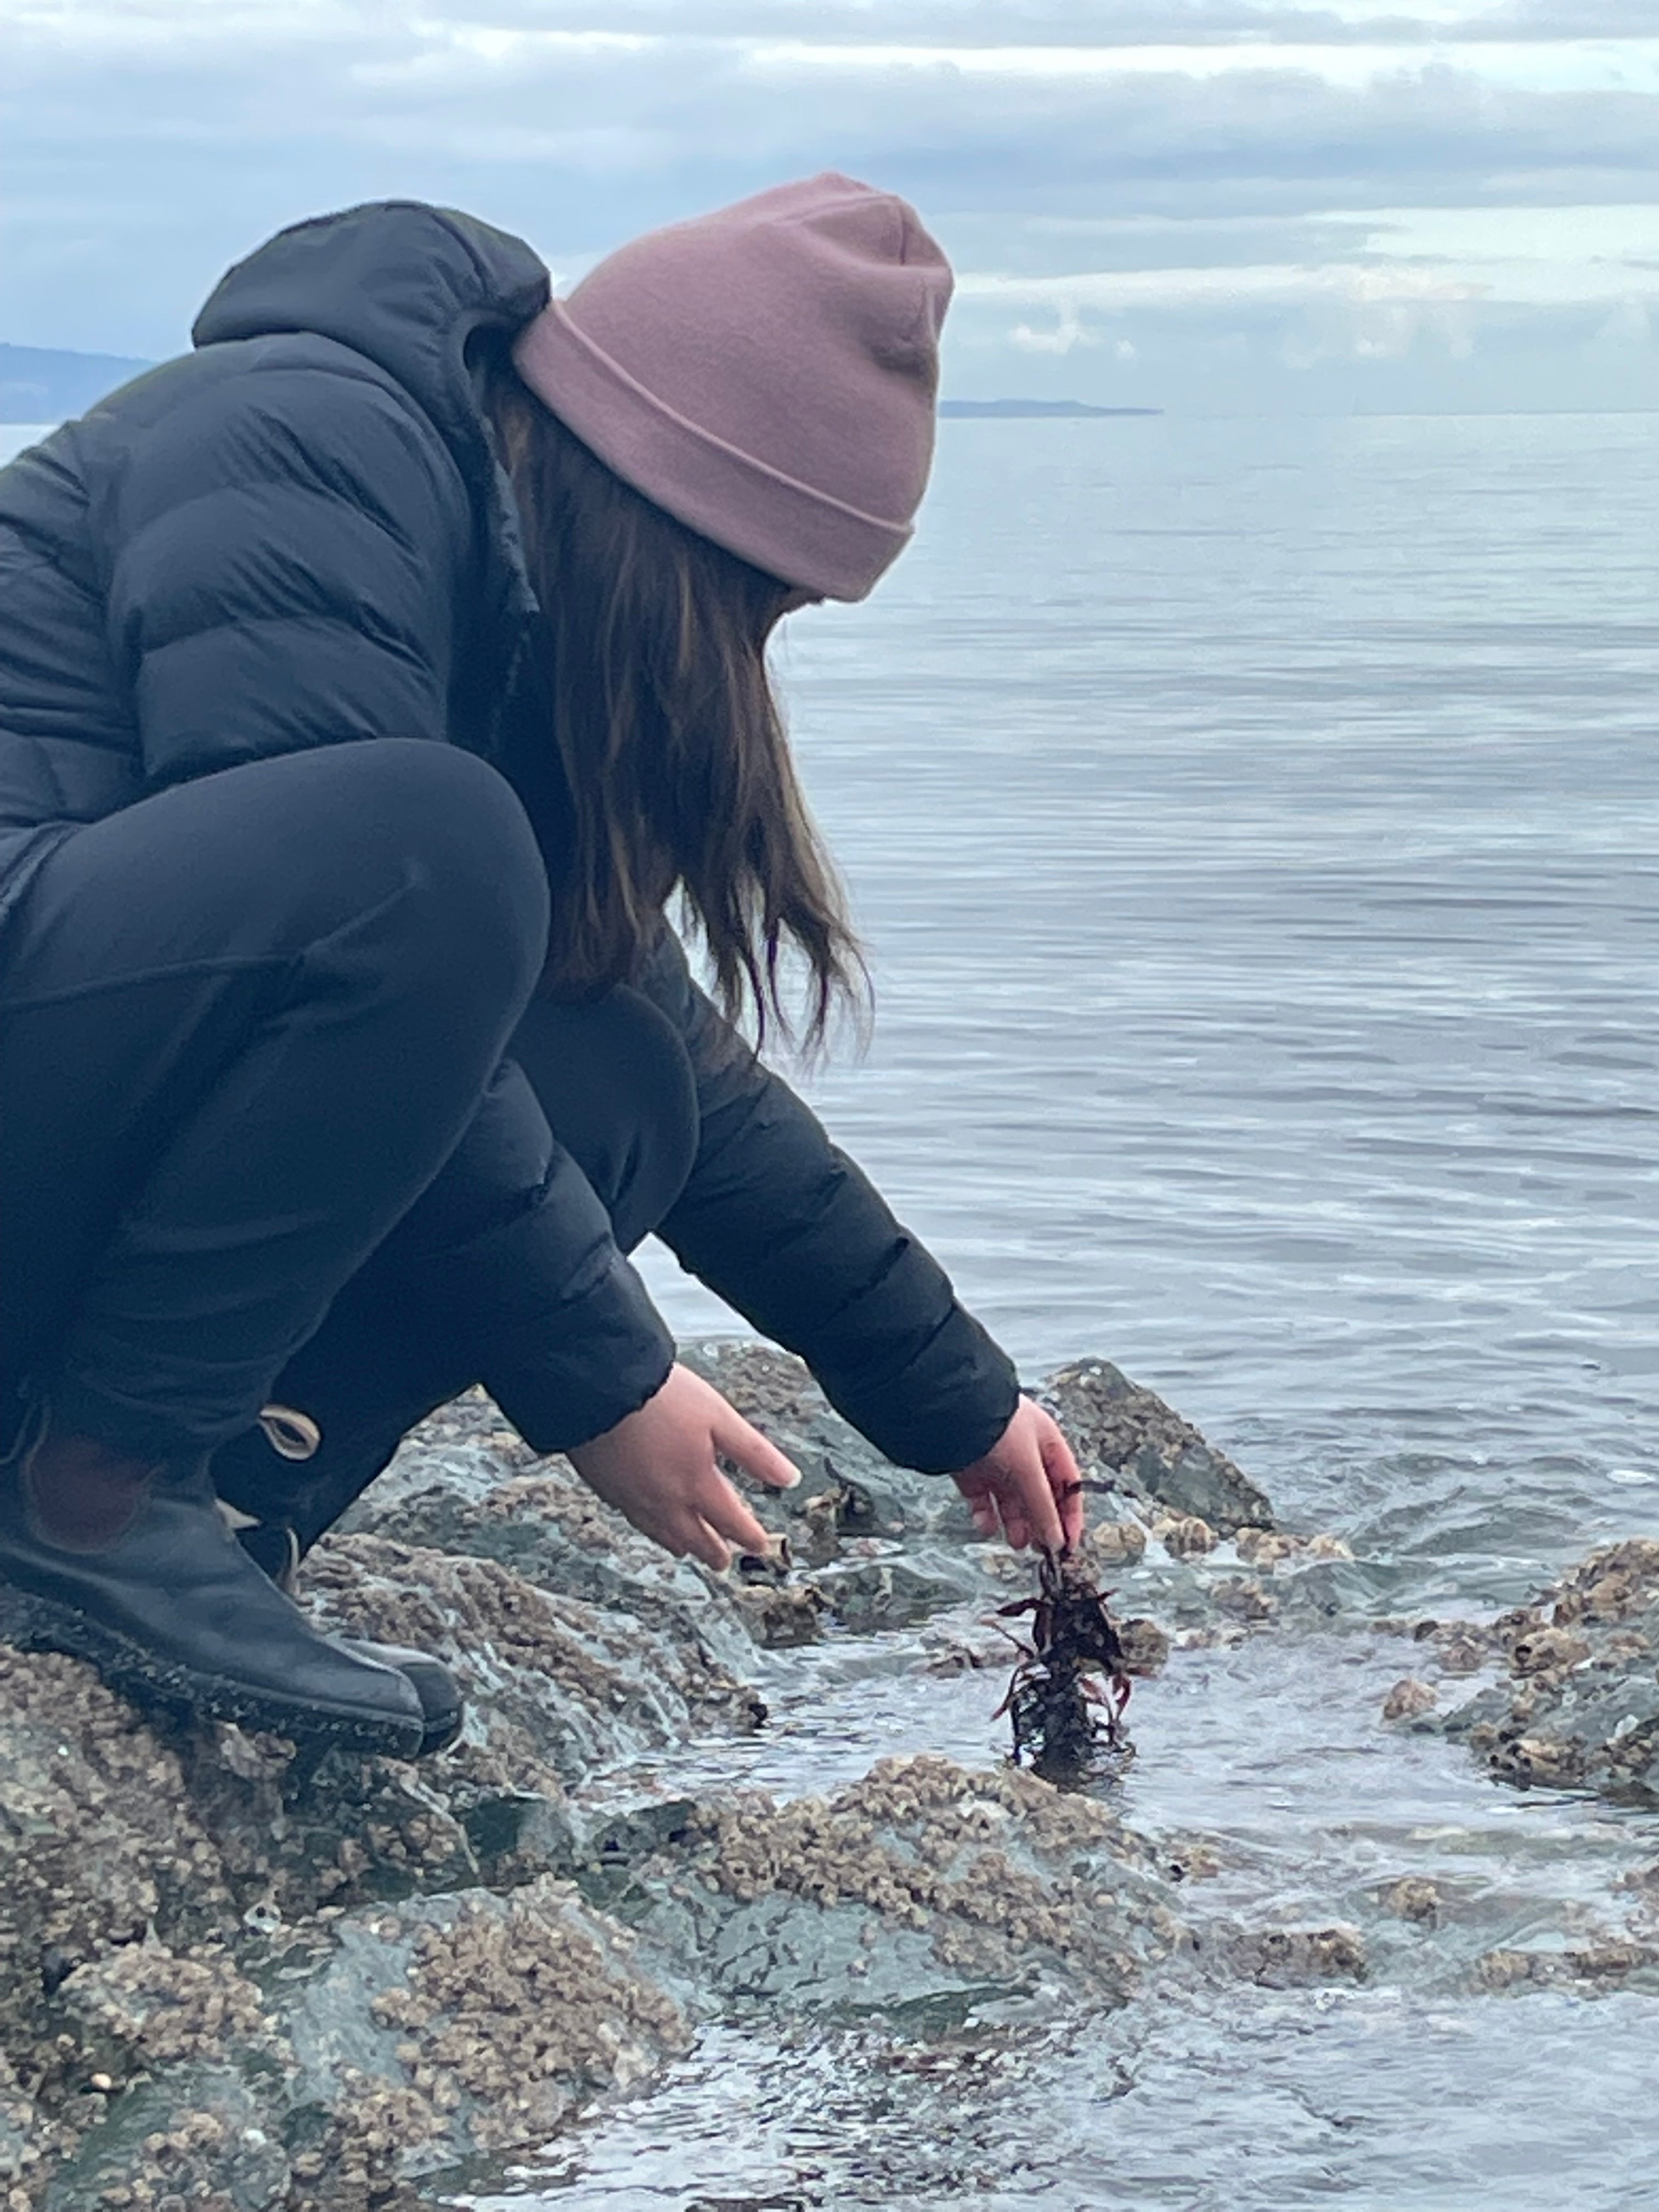 Kelly Zheng examines seaweed on Canada's west coast during her research.